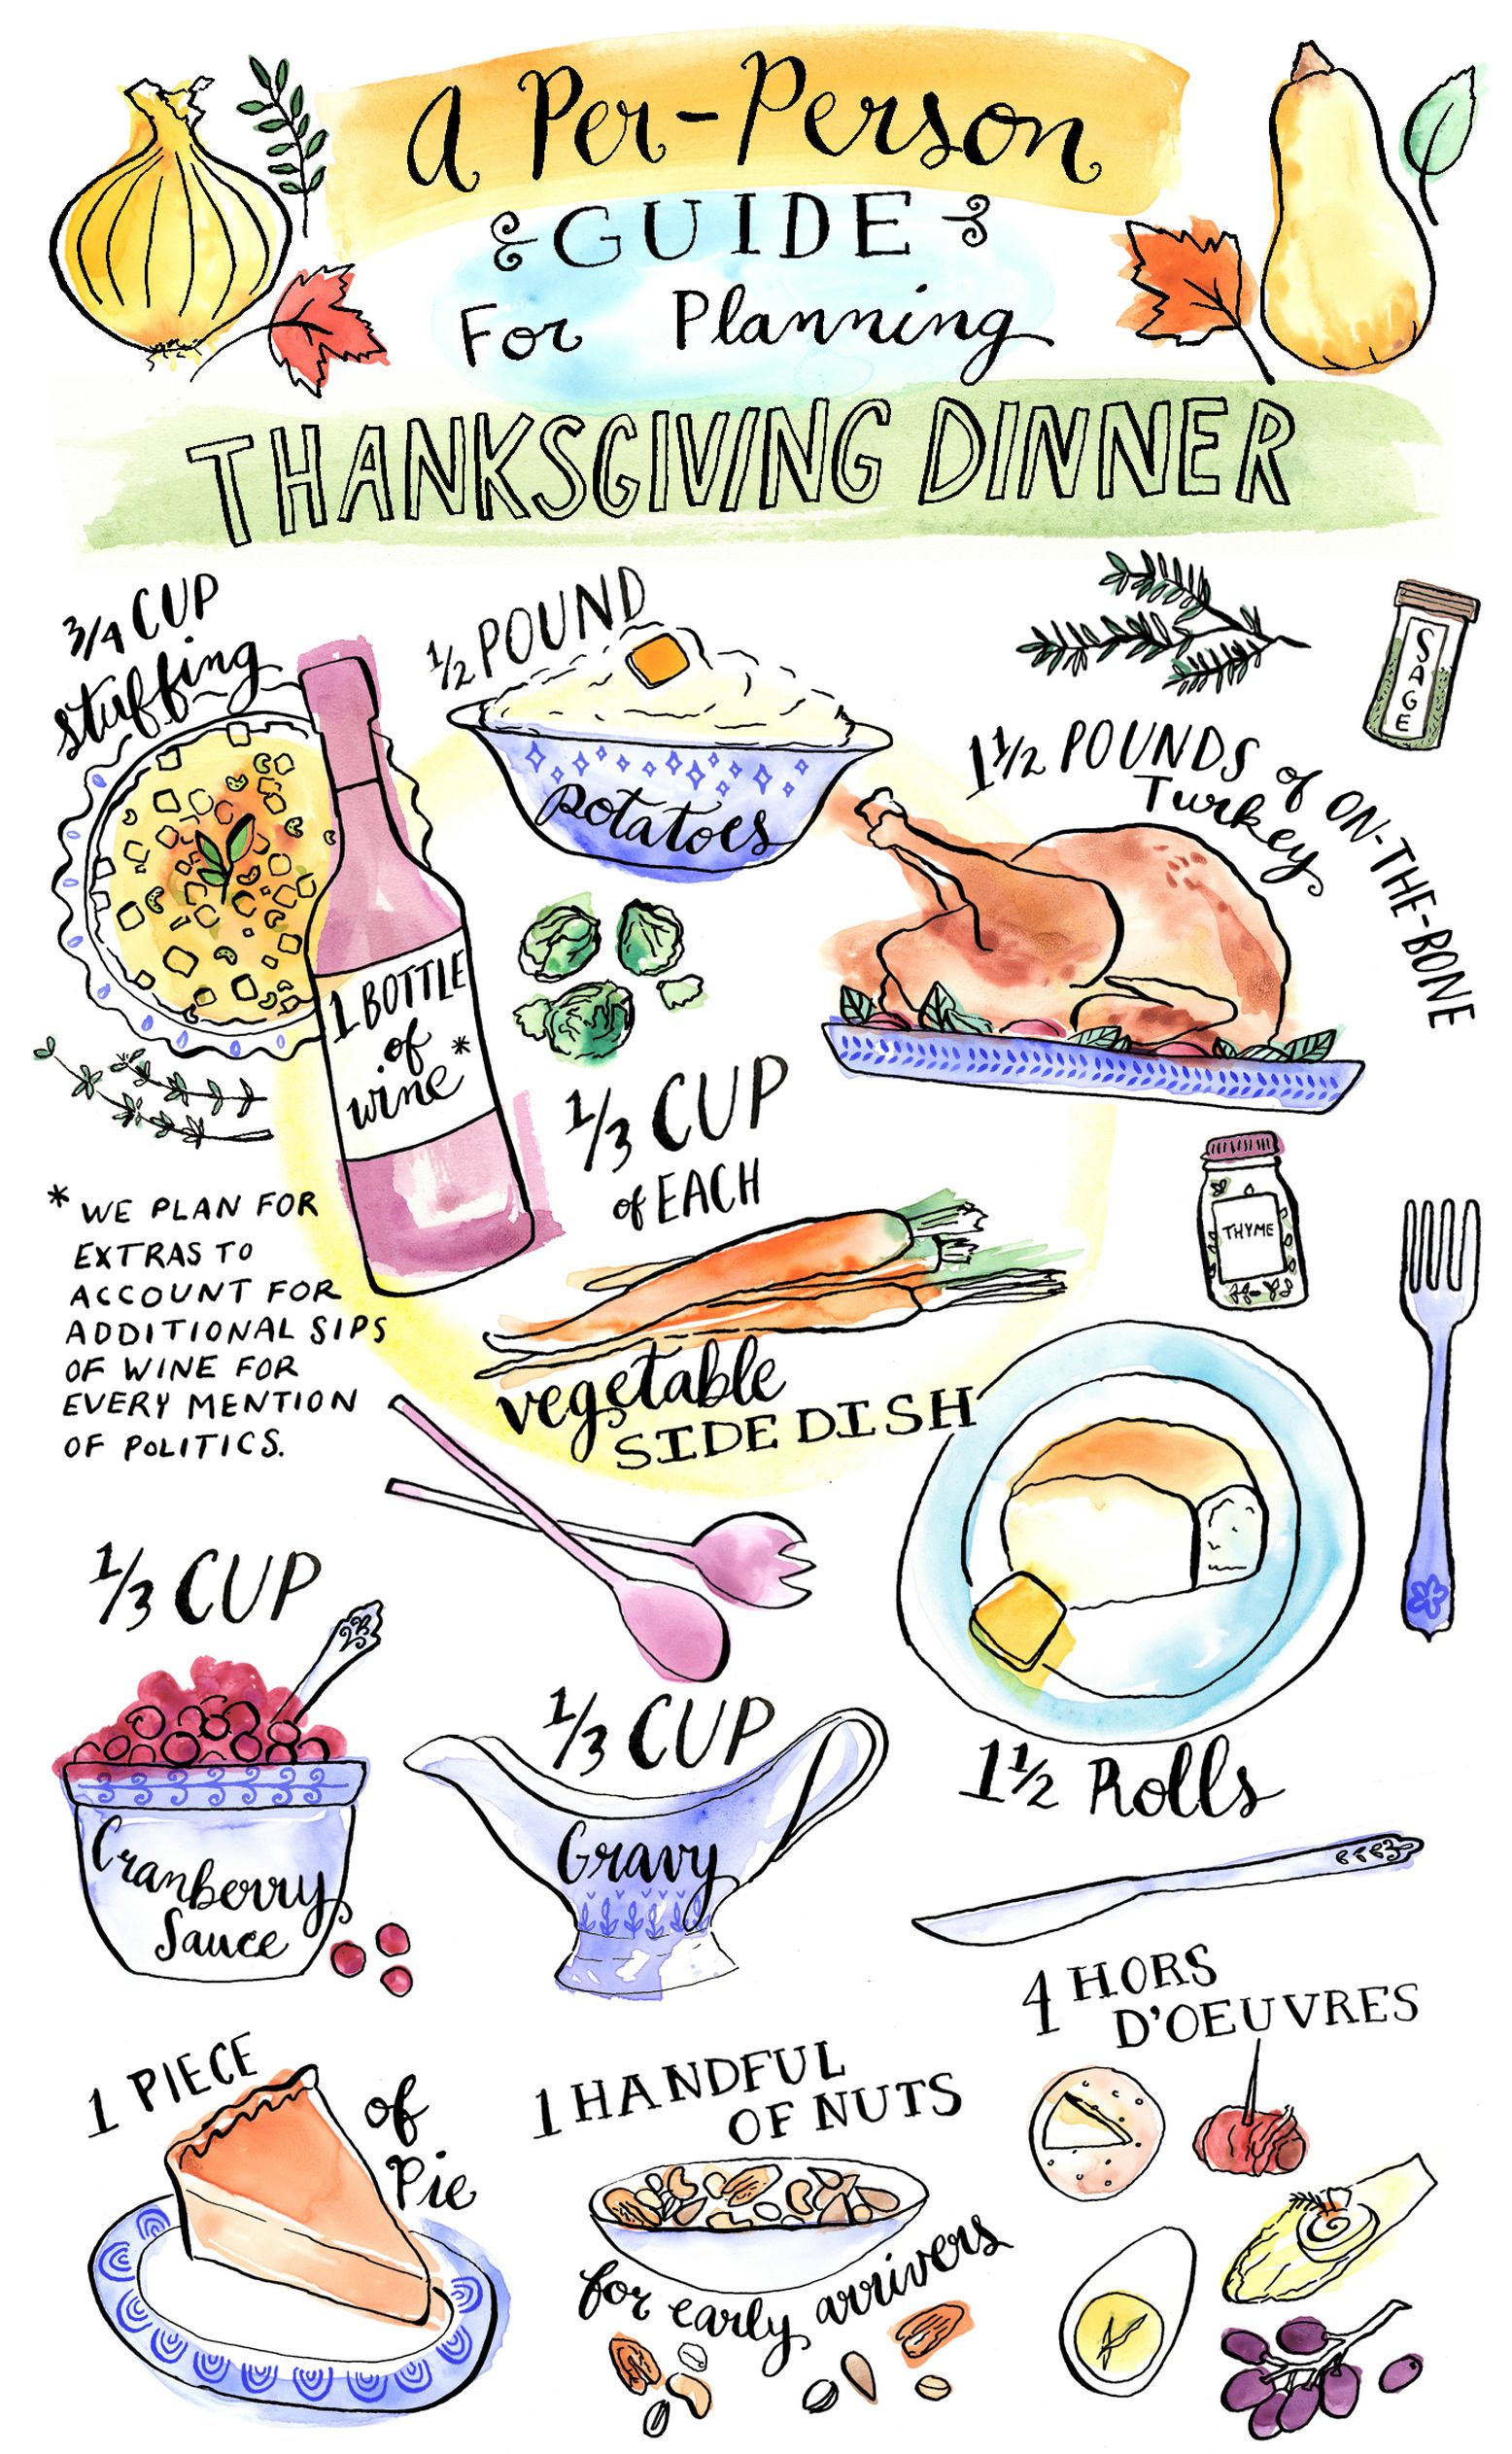 Definitive Per-Person Guide to Planning Thanksgiving Dinner